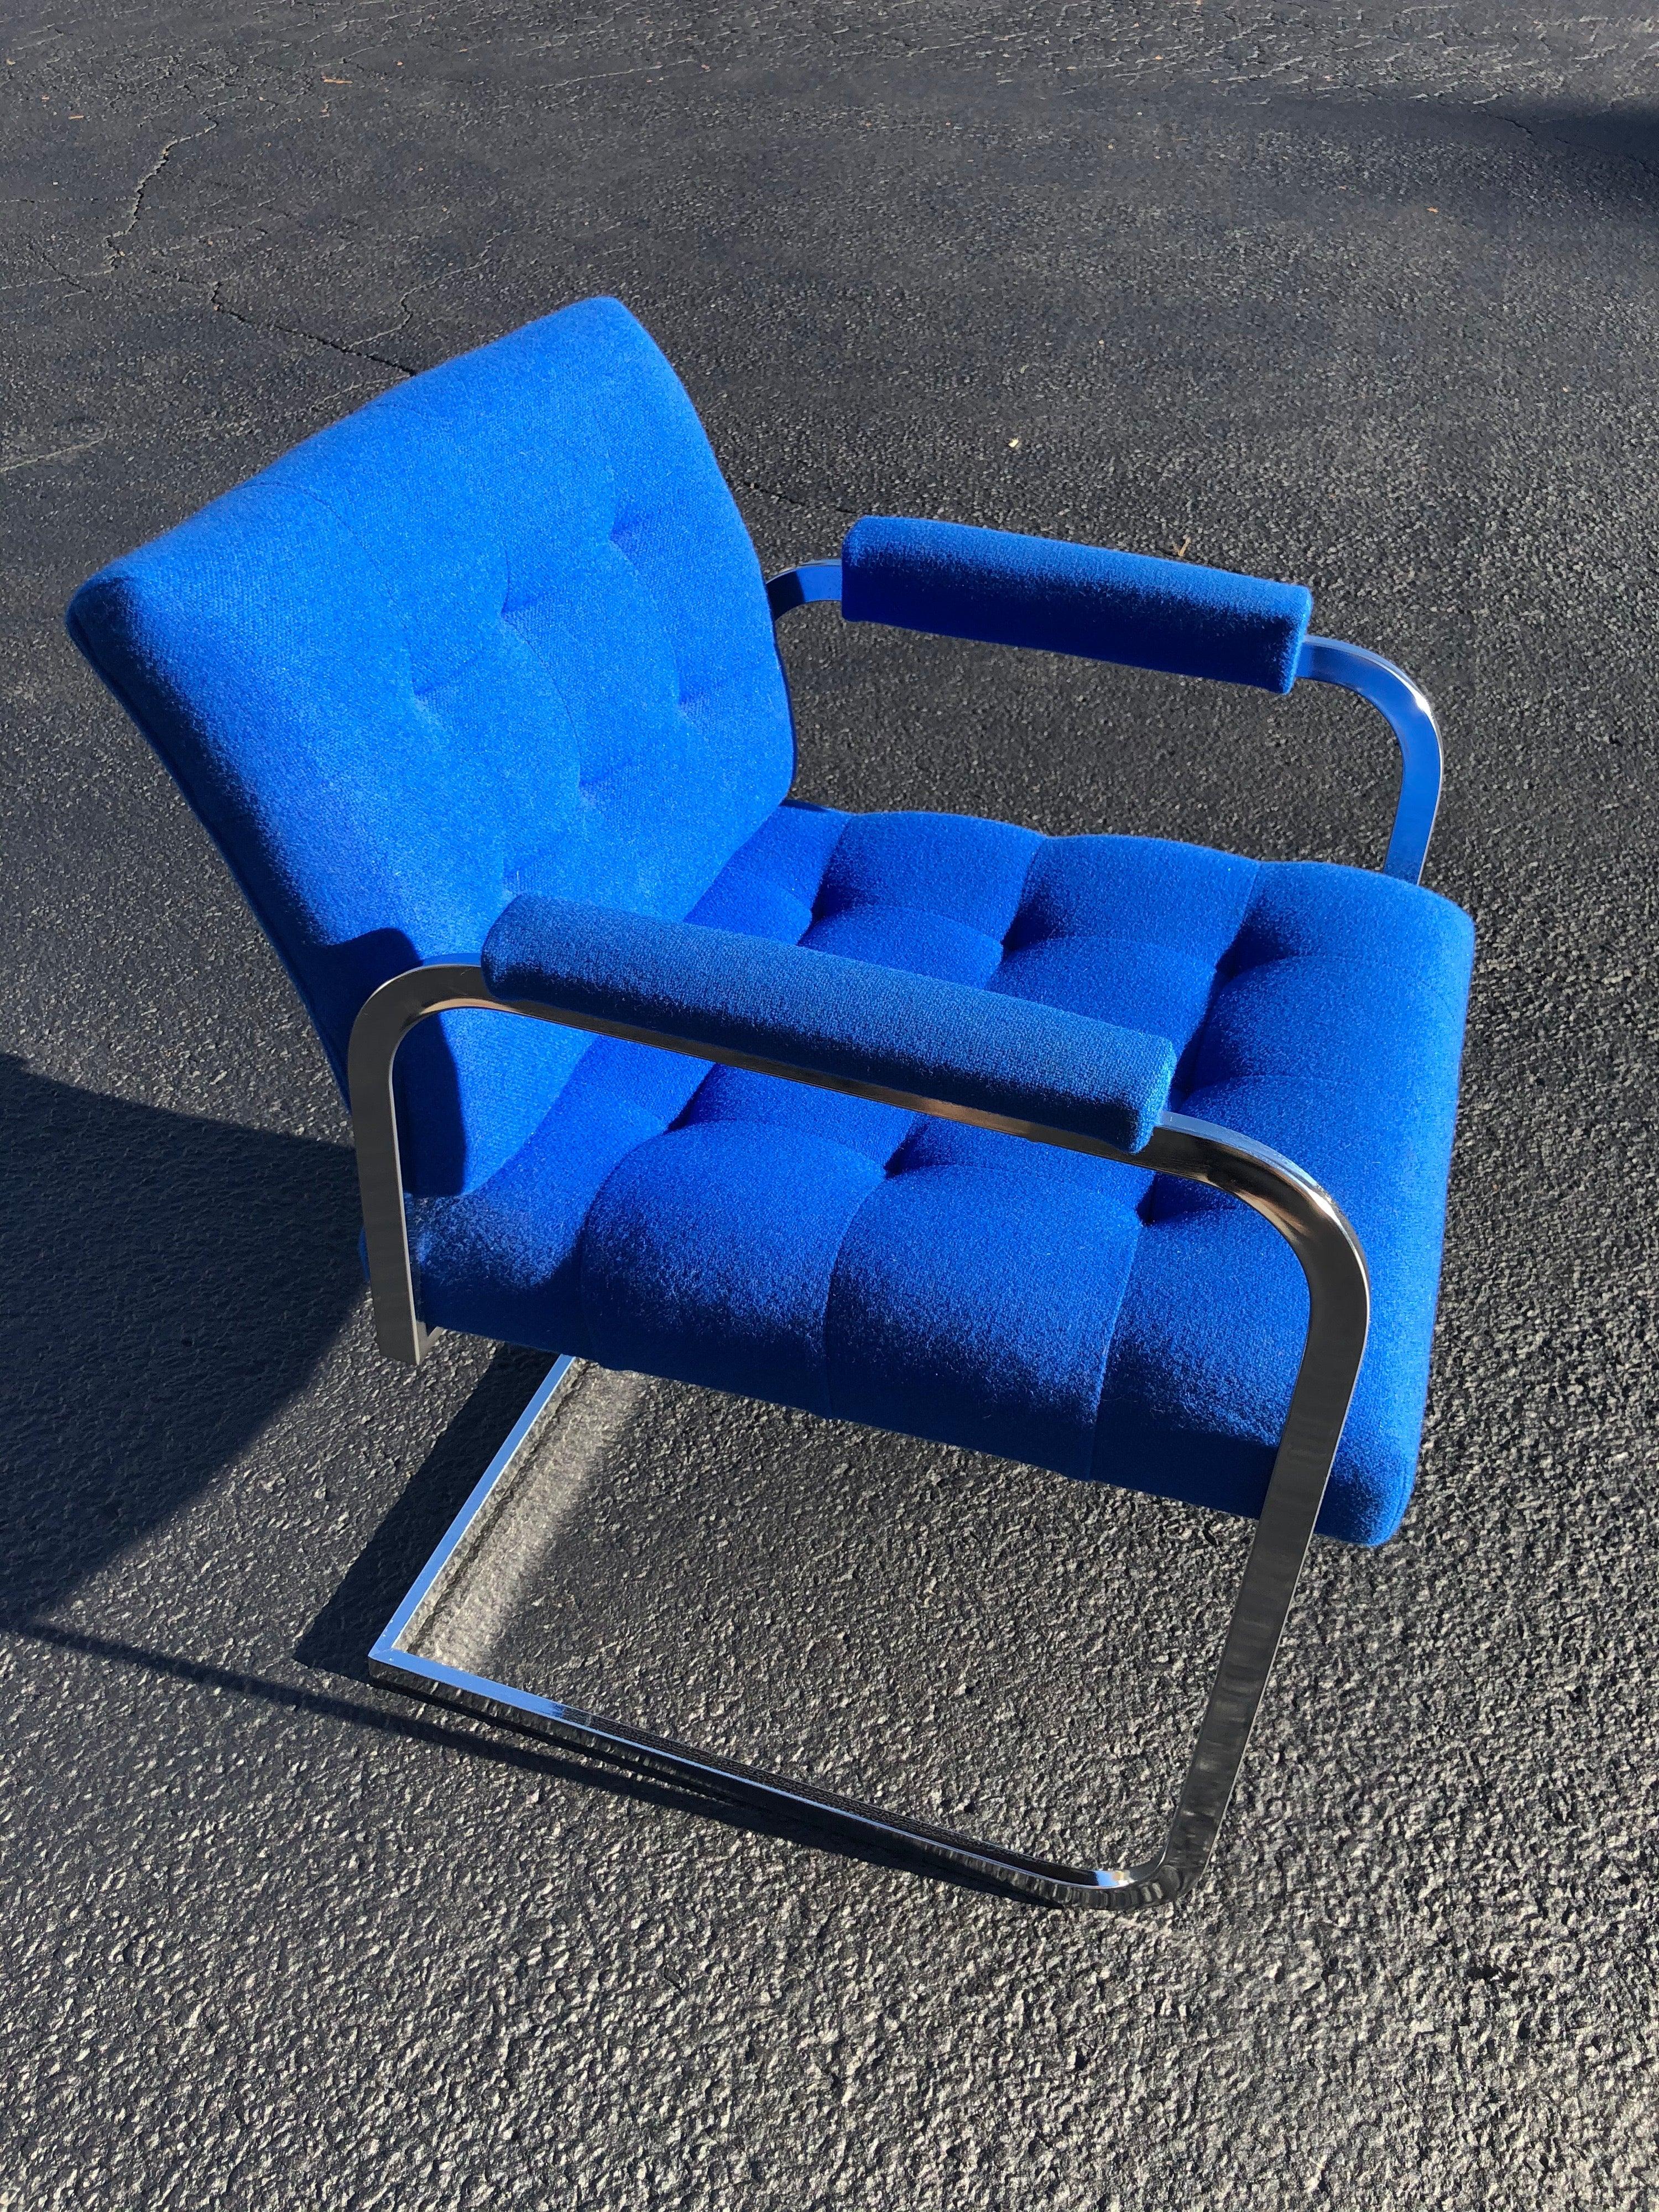 Milo Baughman style chrome armchair in original electric blue upholstery with cantilevered base. Tufted upper back for extra comfort.